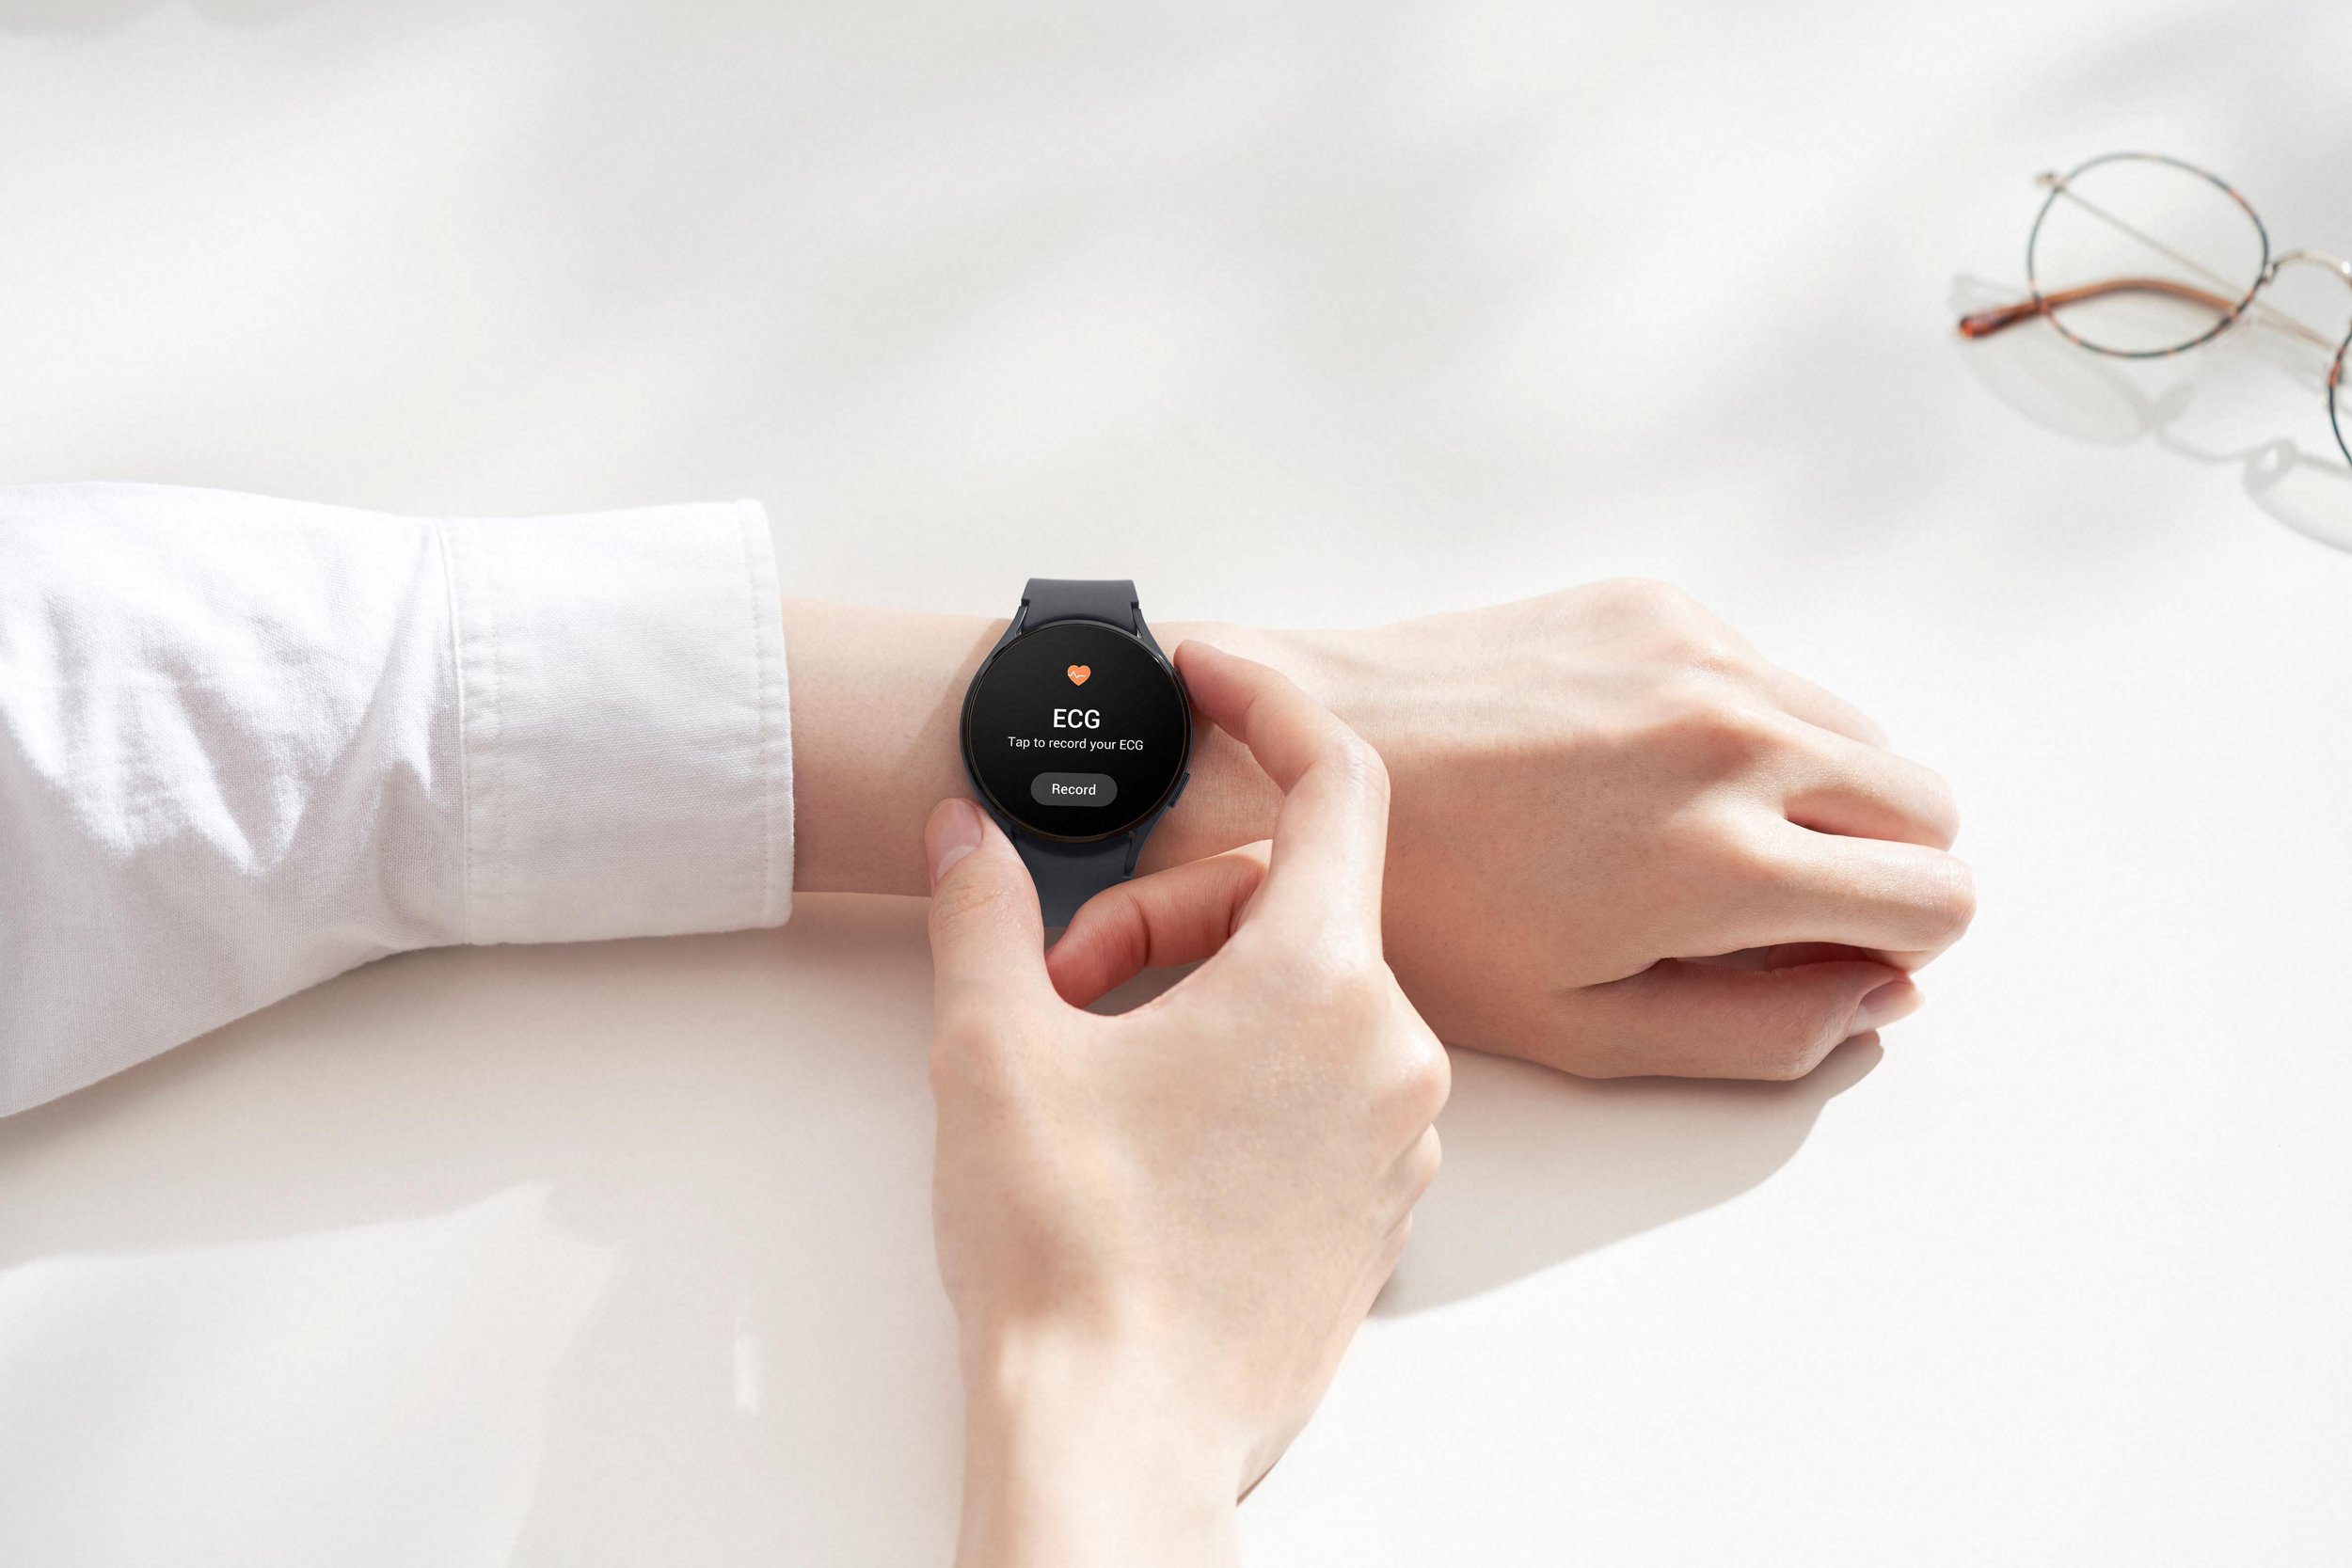 More Districts can Now Utilize Irregular Heart Rhythm Notifications on the Galaxy Watch